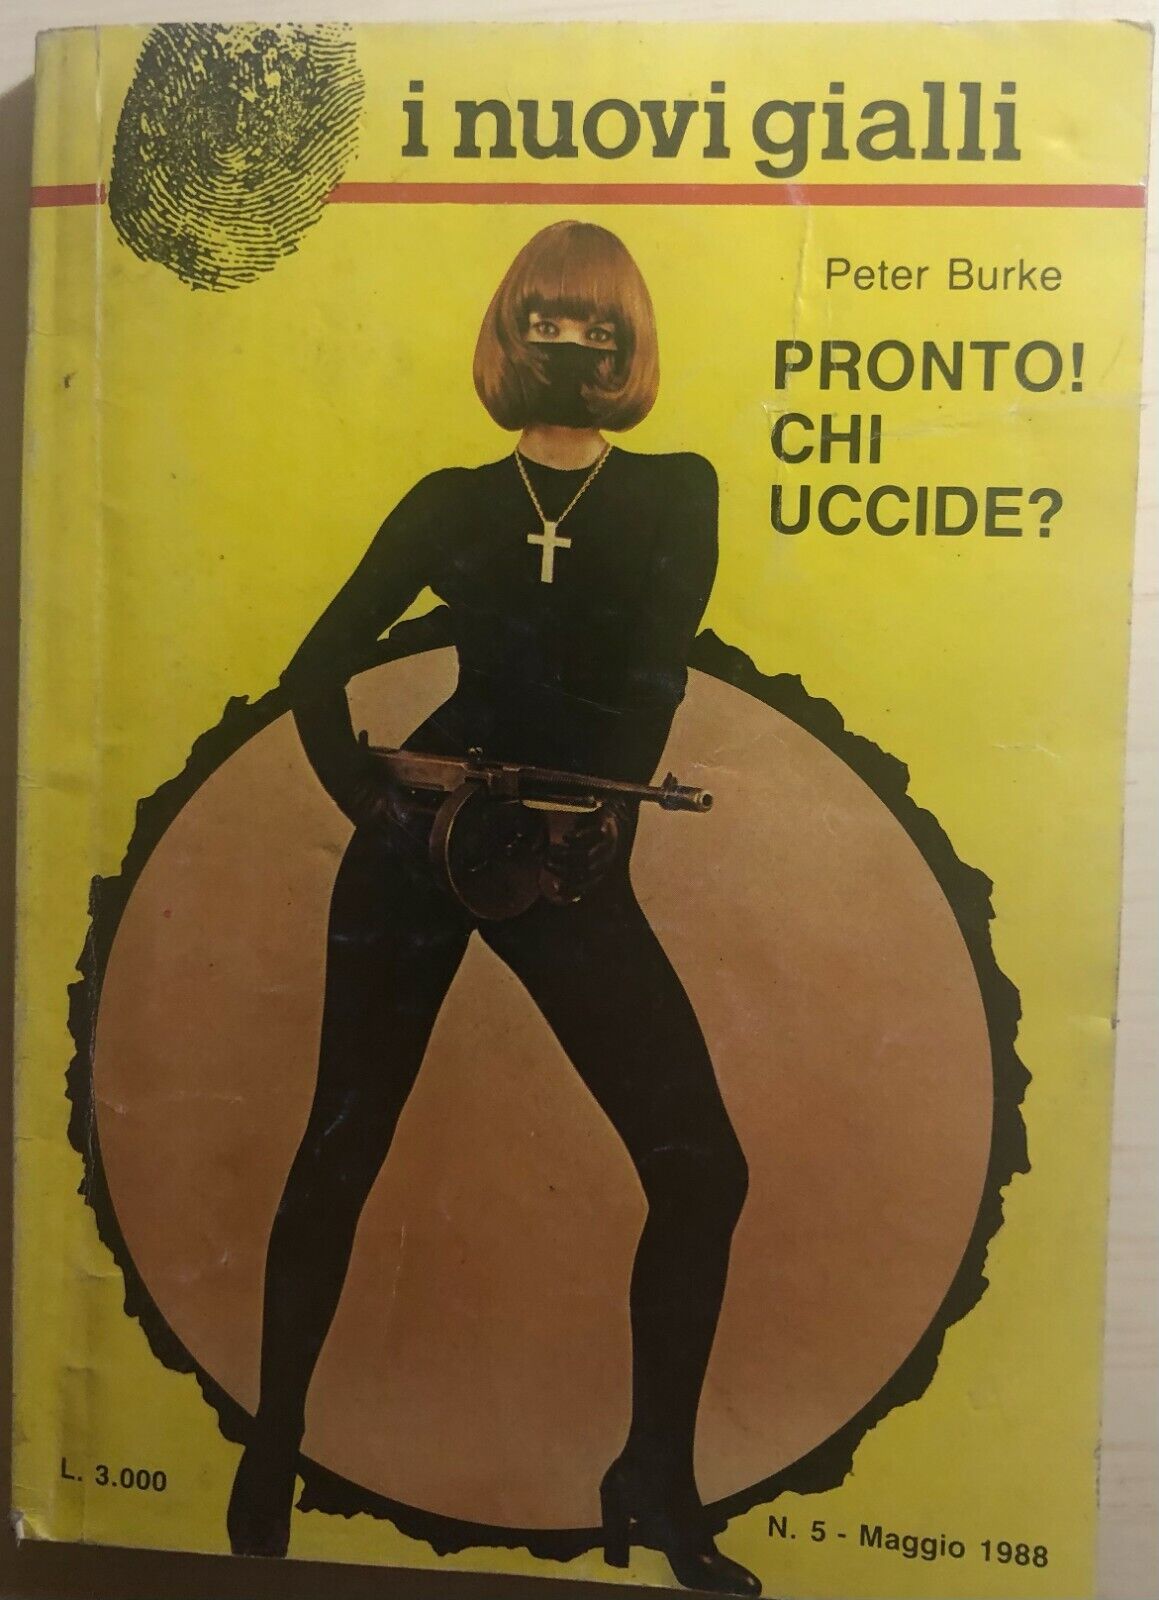 Pronto! Chi uccide? di Peter Burke,  1988,  Igep